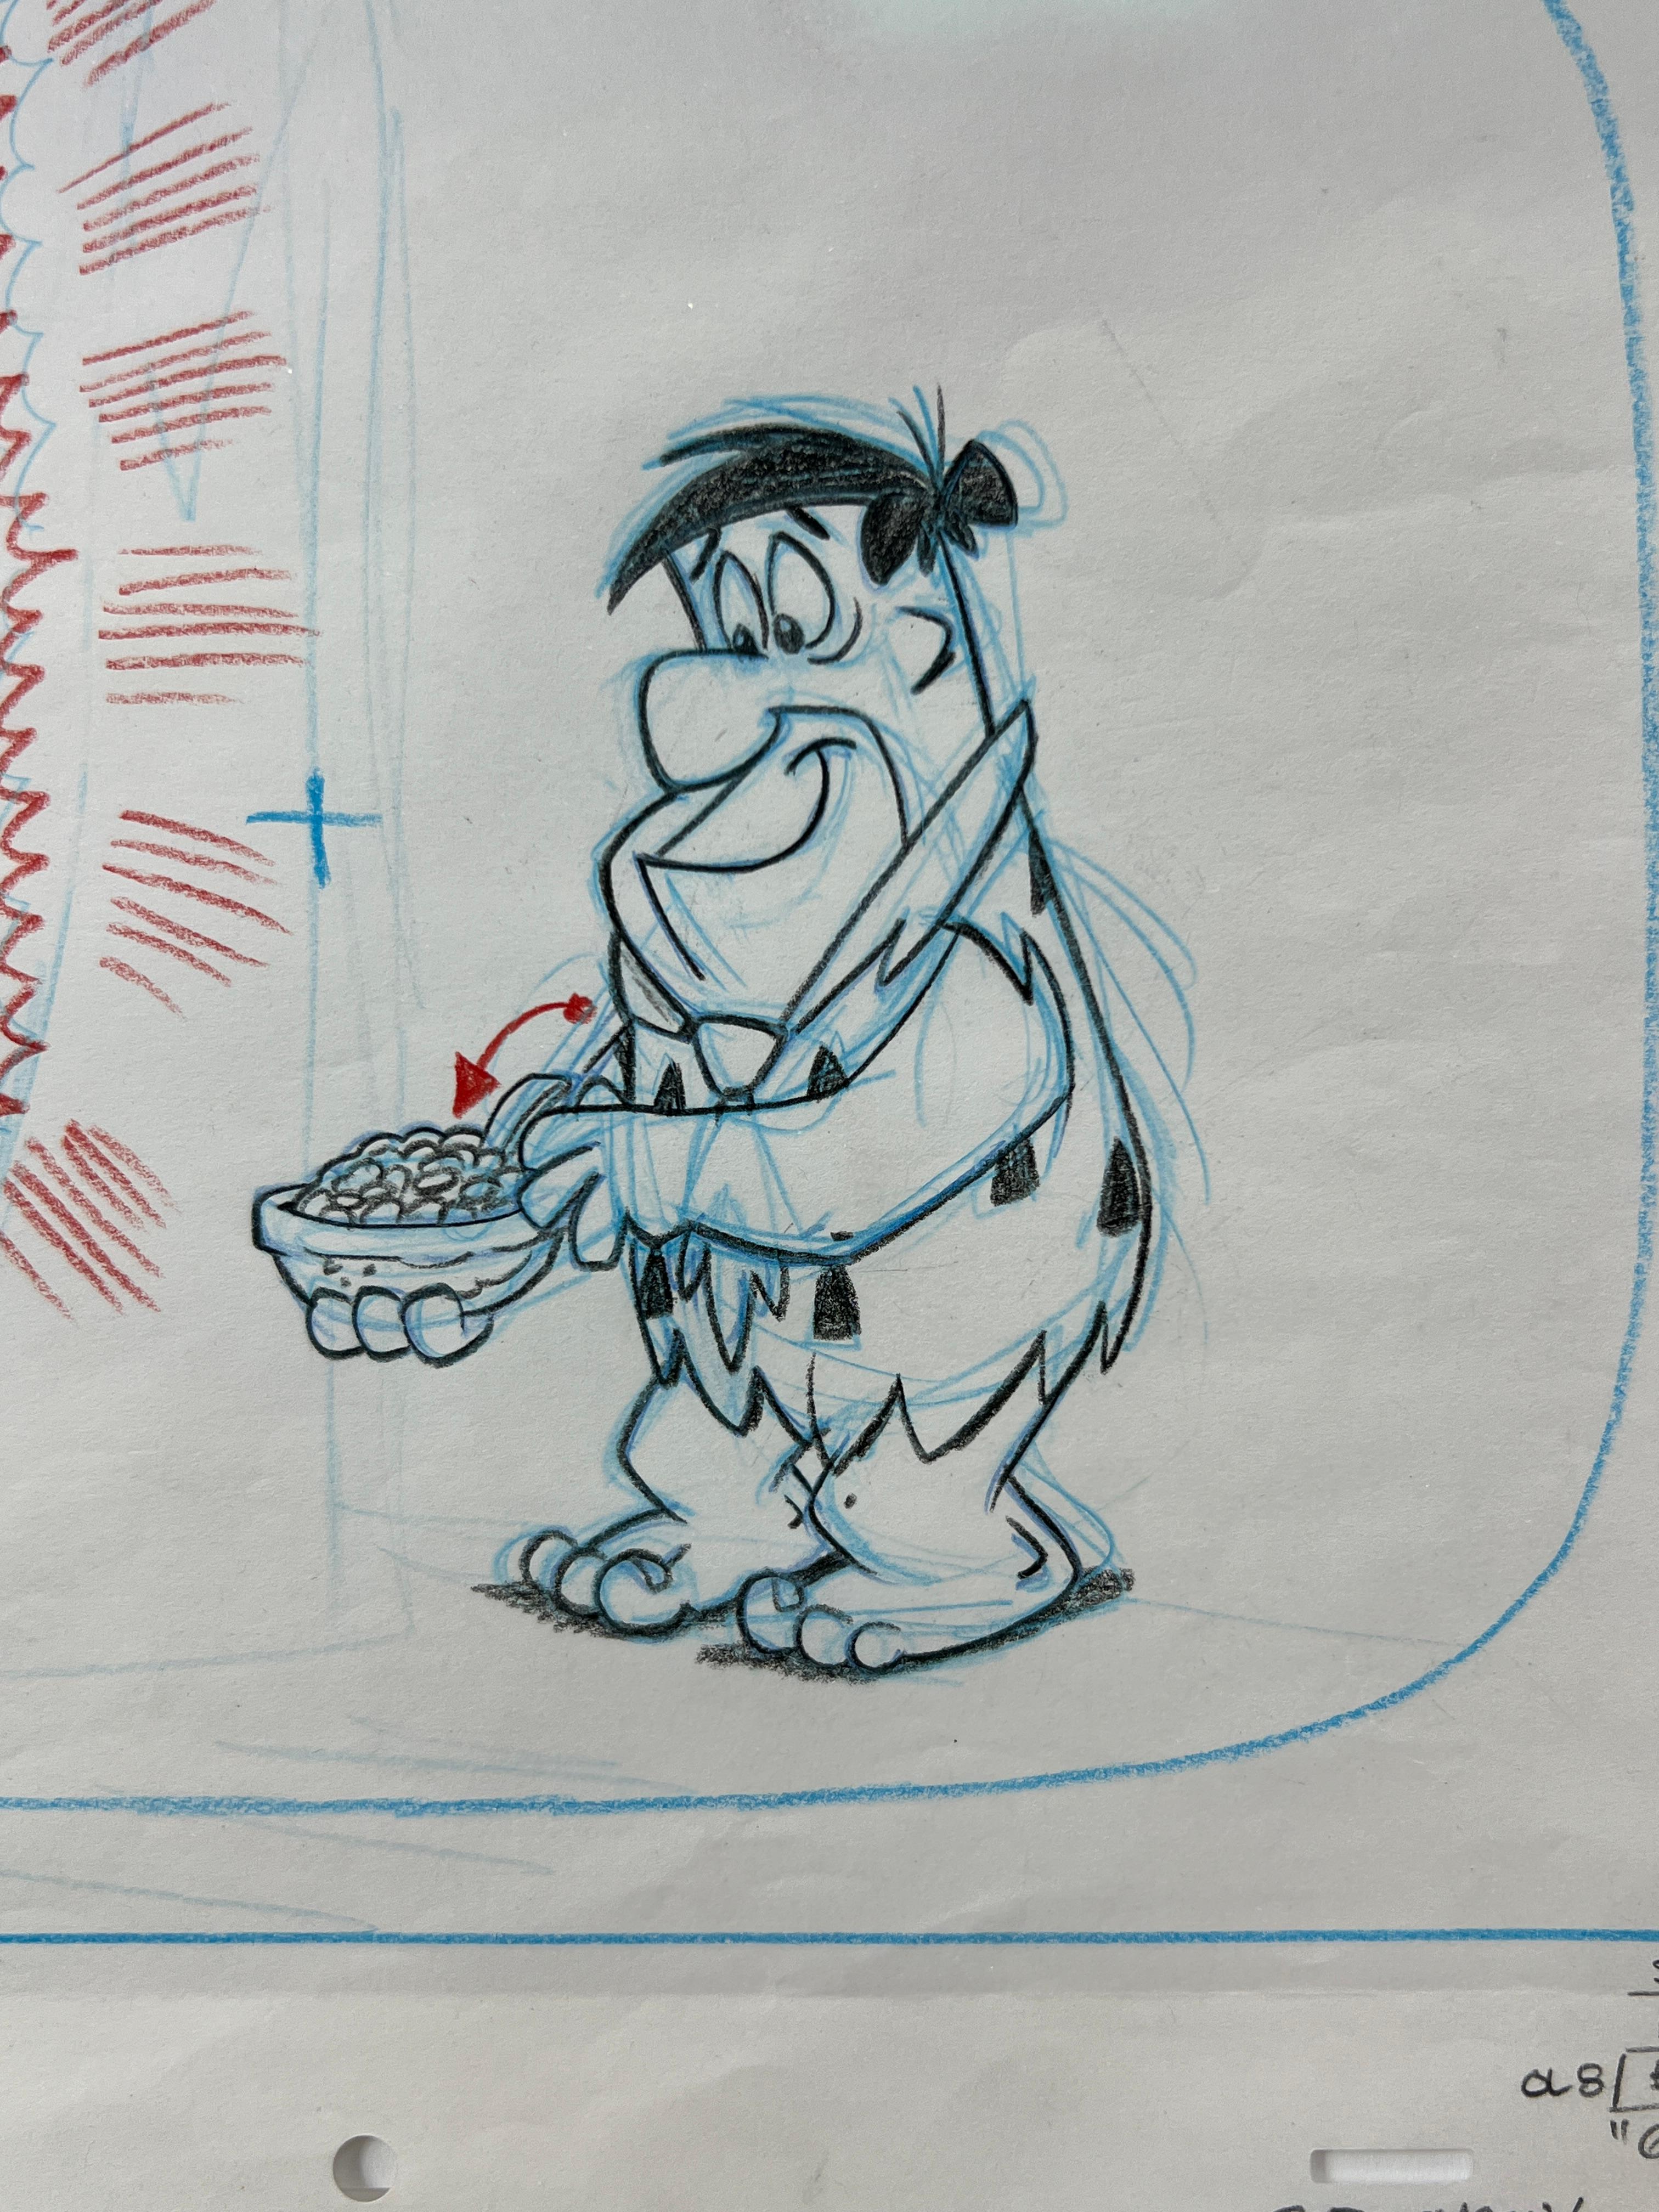 Fred Flintstone original pencil production drawing animation signed by Scott Shaw